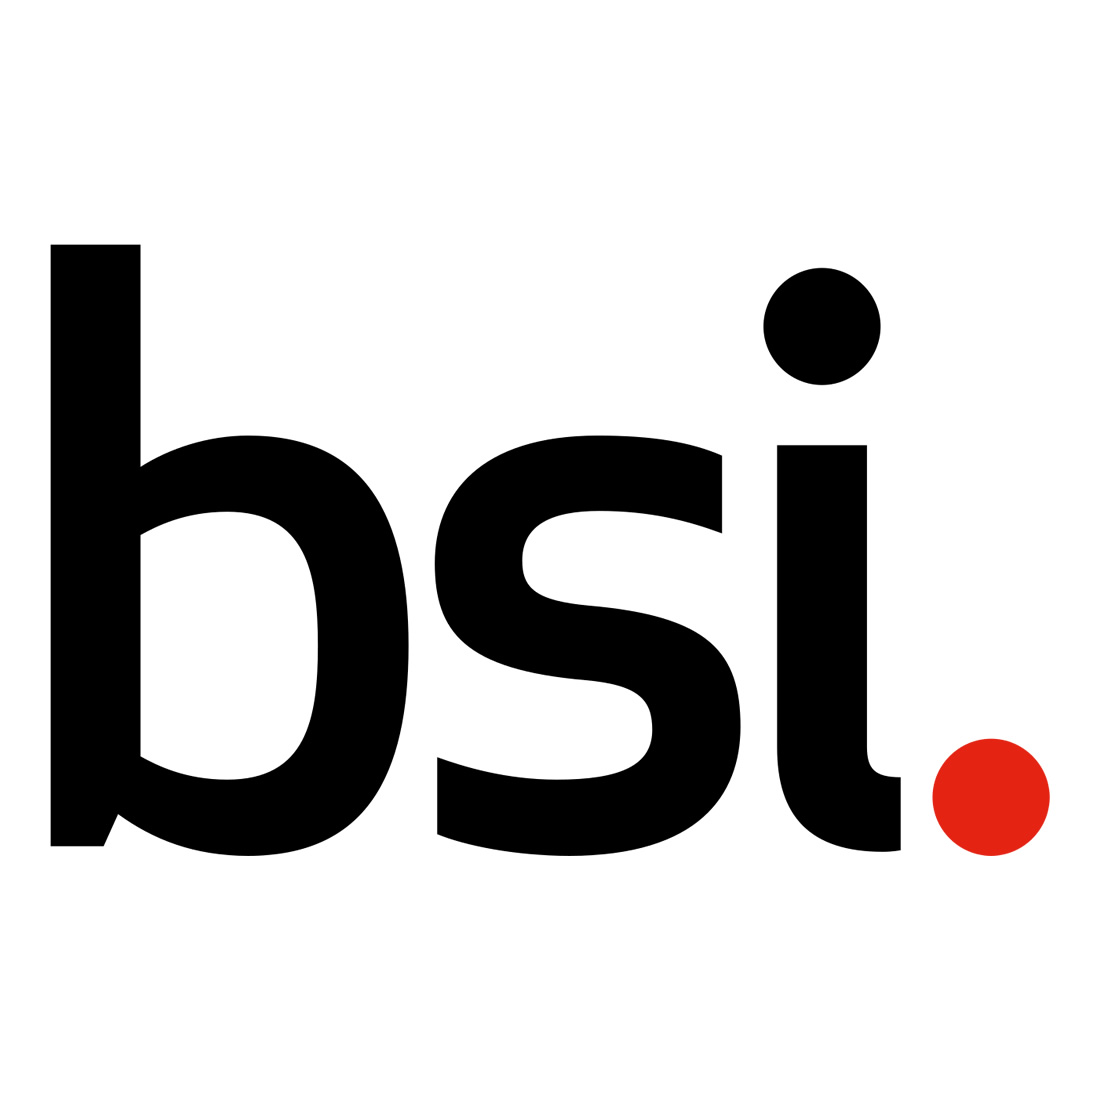 BSI is a leading provider of business improvement solutions. Comprised of management system certifications, compliance software, training programs, advisory services, and supply chain solutions, BSI helps organizations manage risk, performance and sustainability activities that transform best practice into habits of excellence.